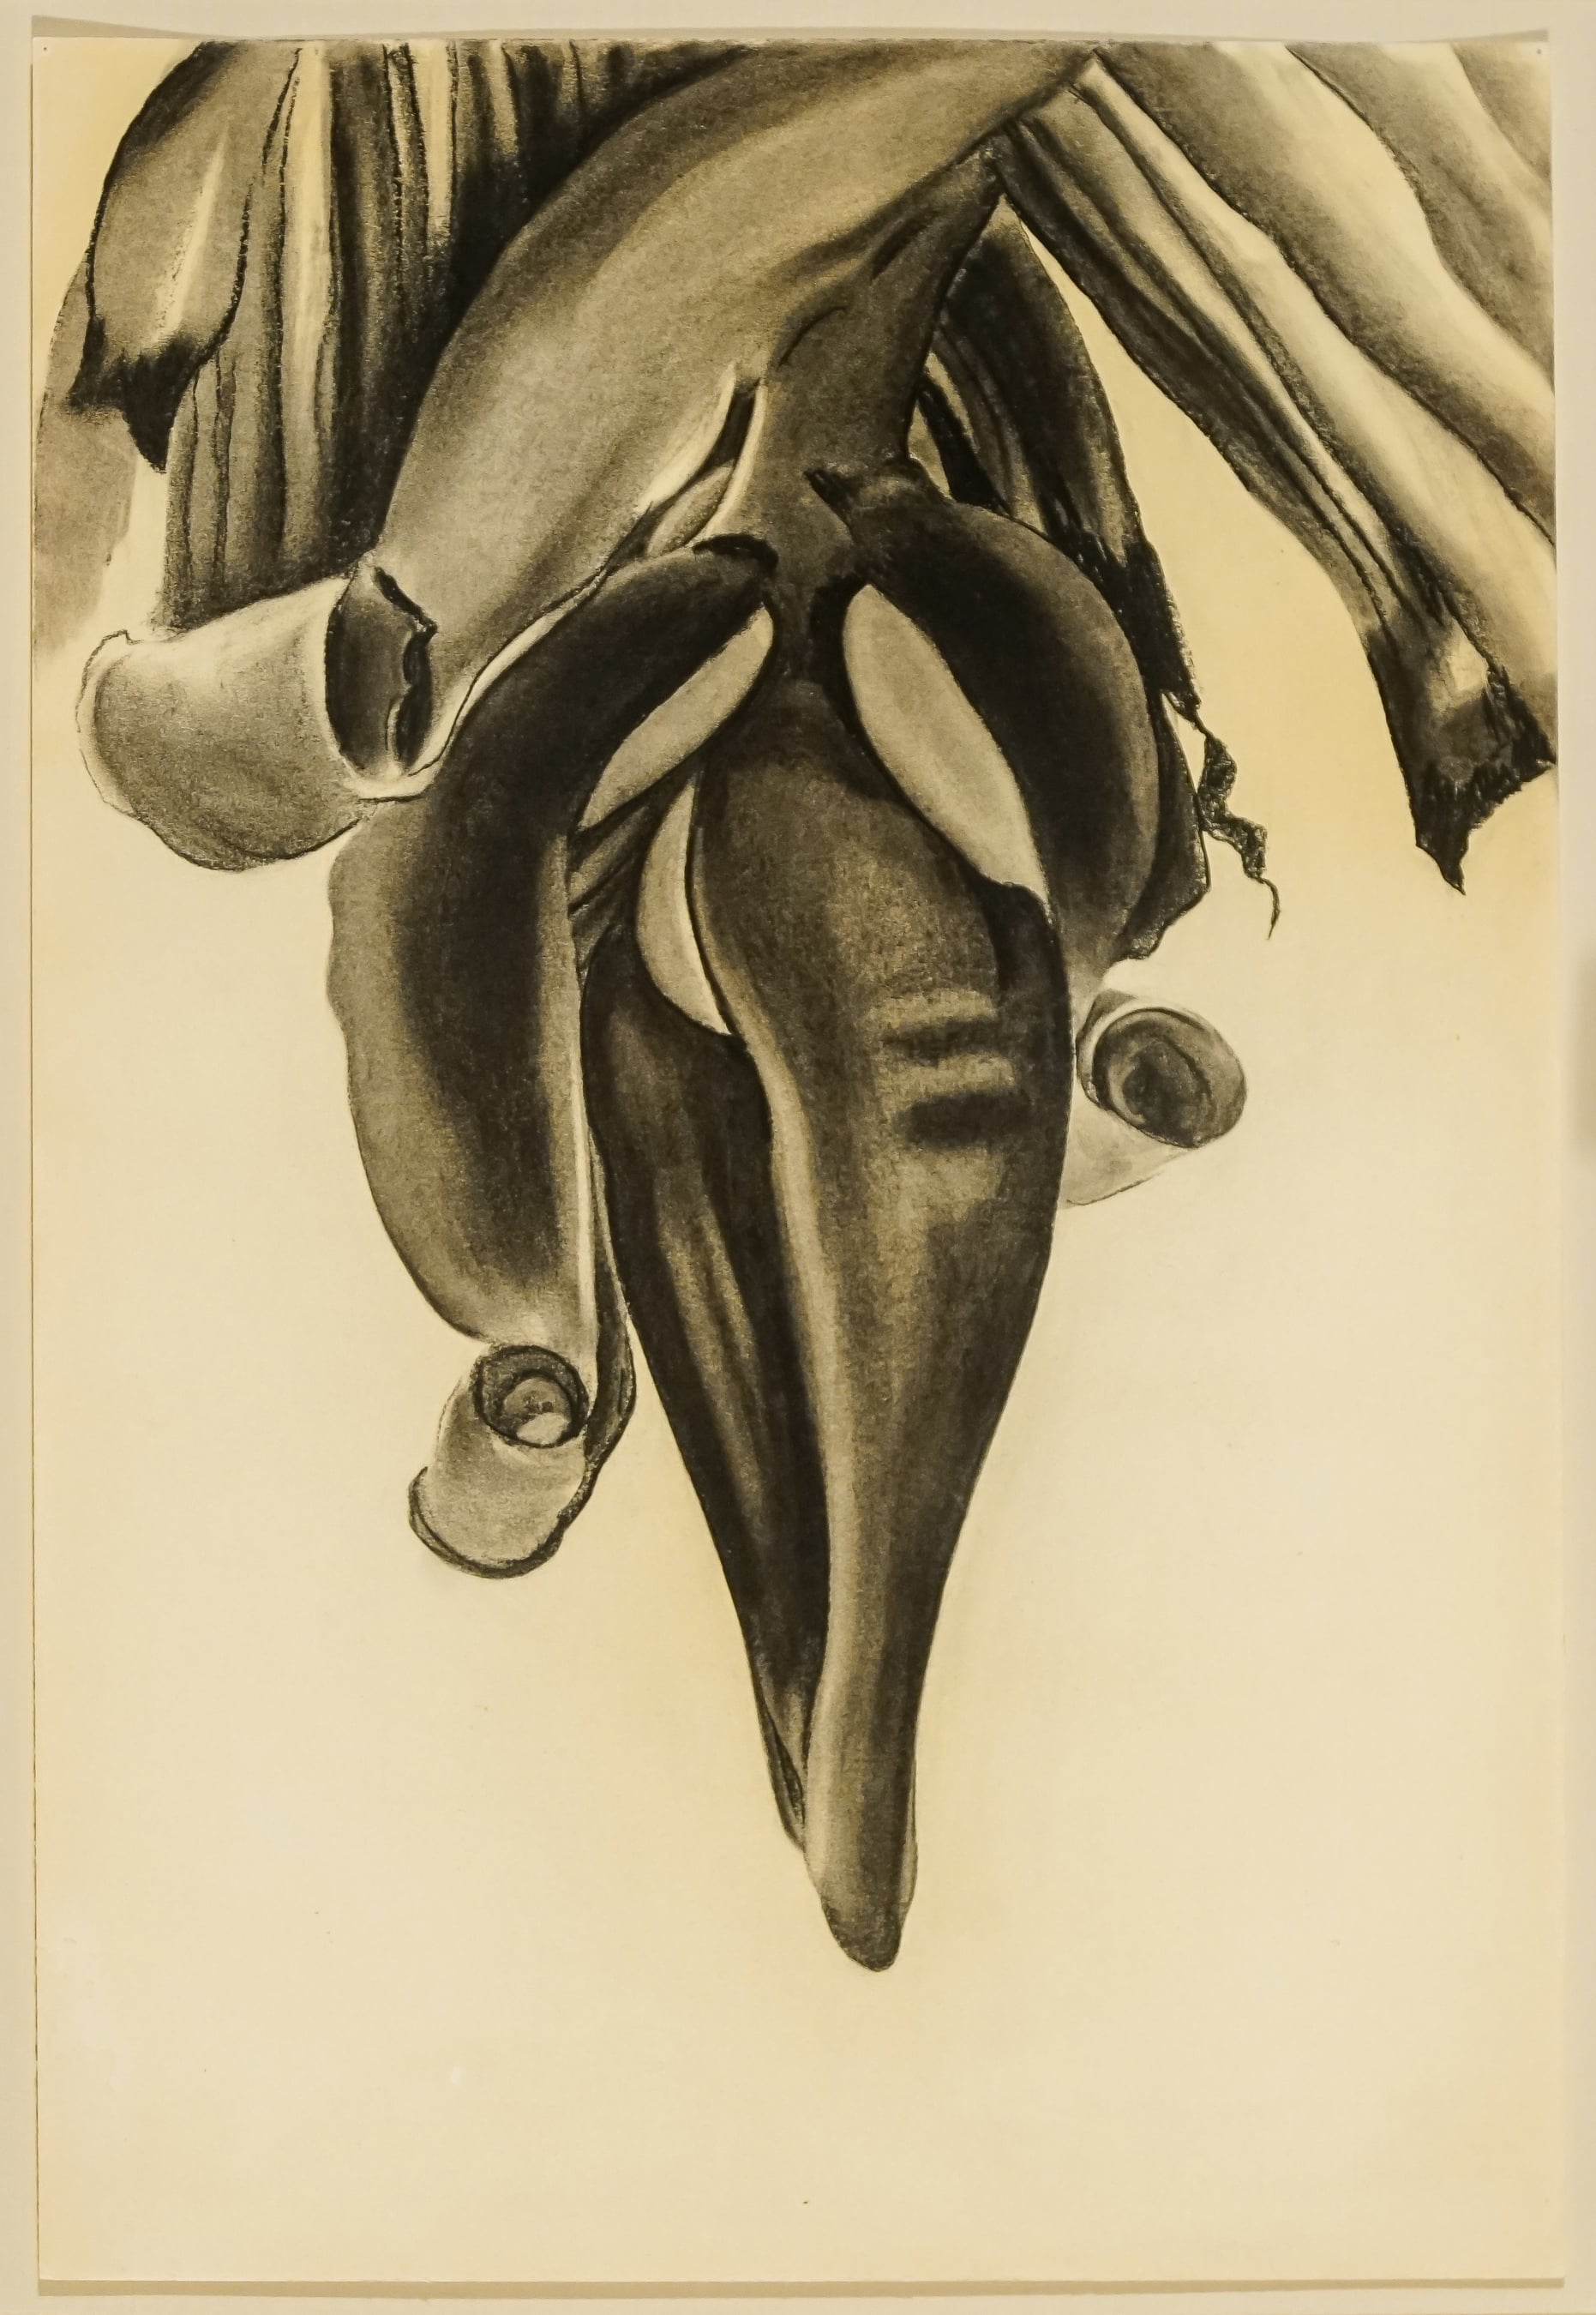 Untitled (image of a banana flower)